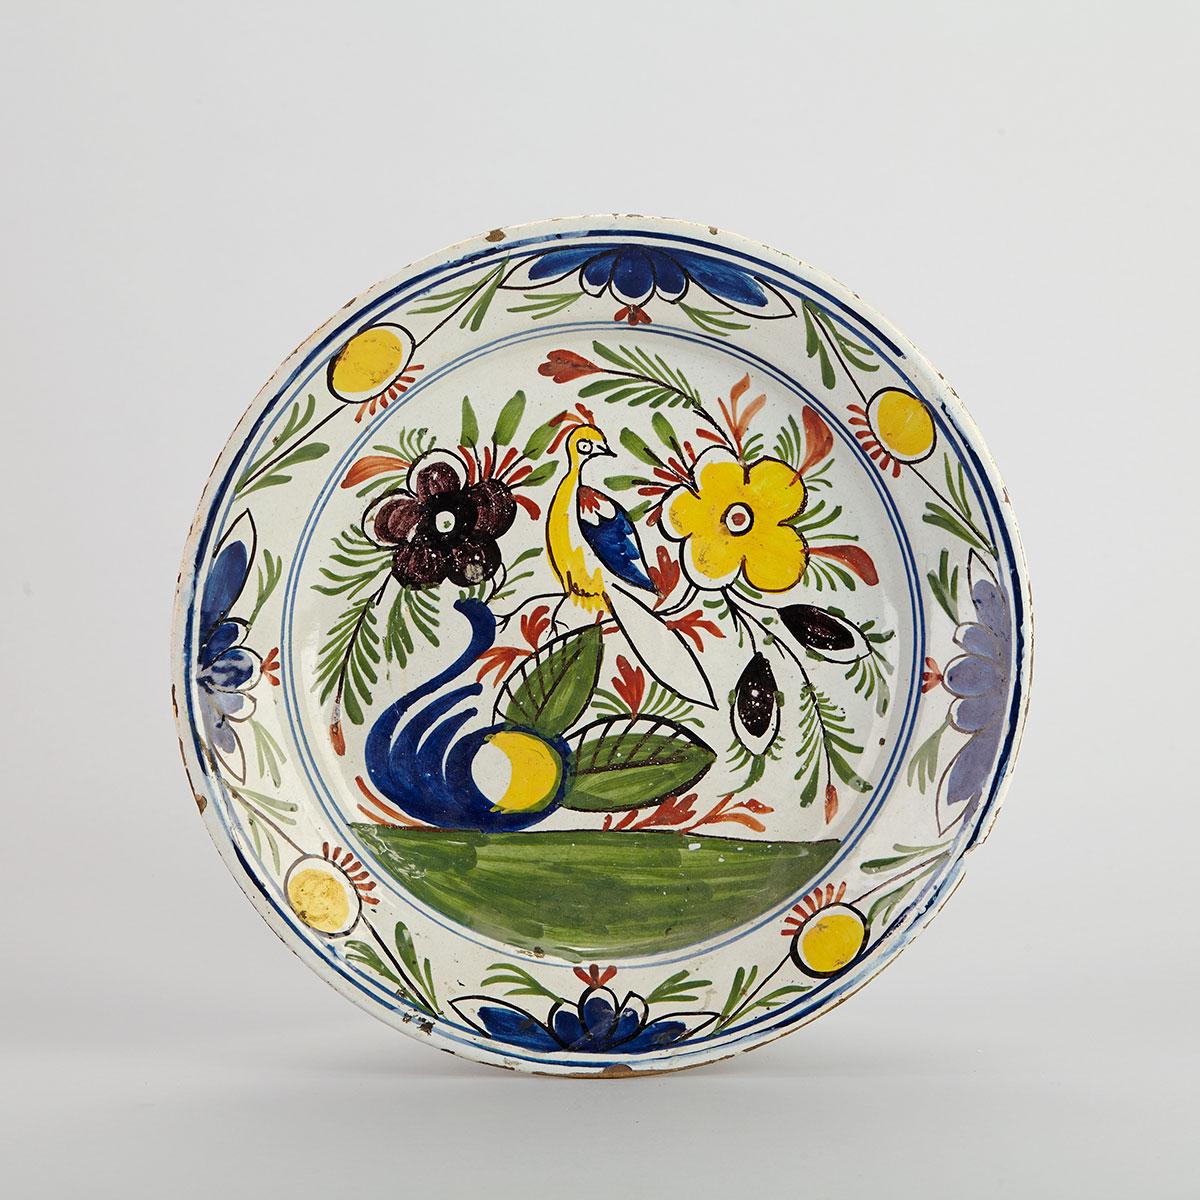 Delft Polychrome Charger, 18th century